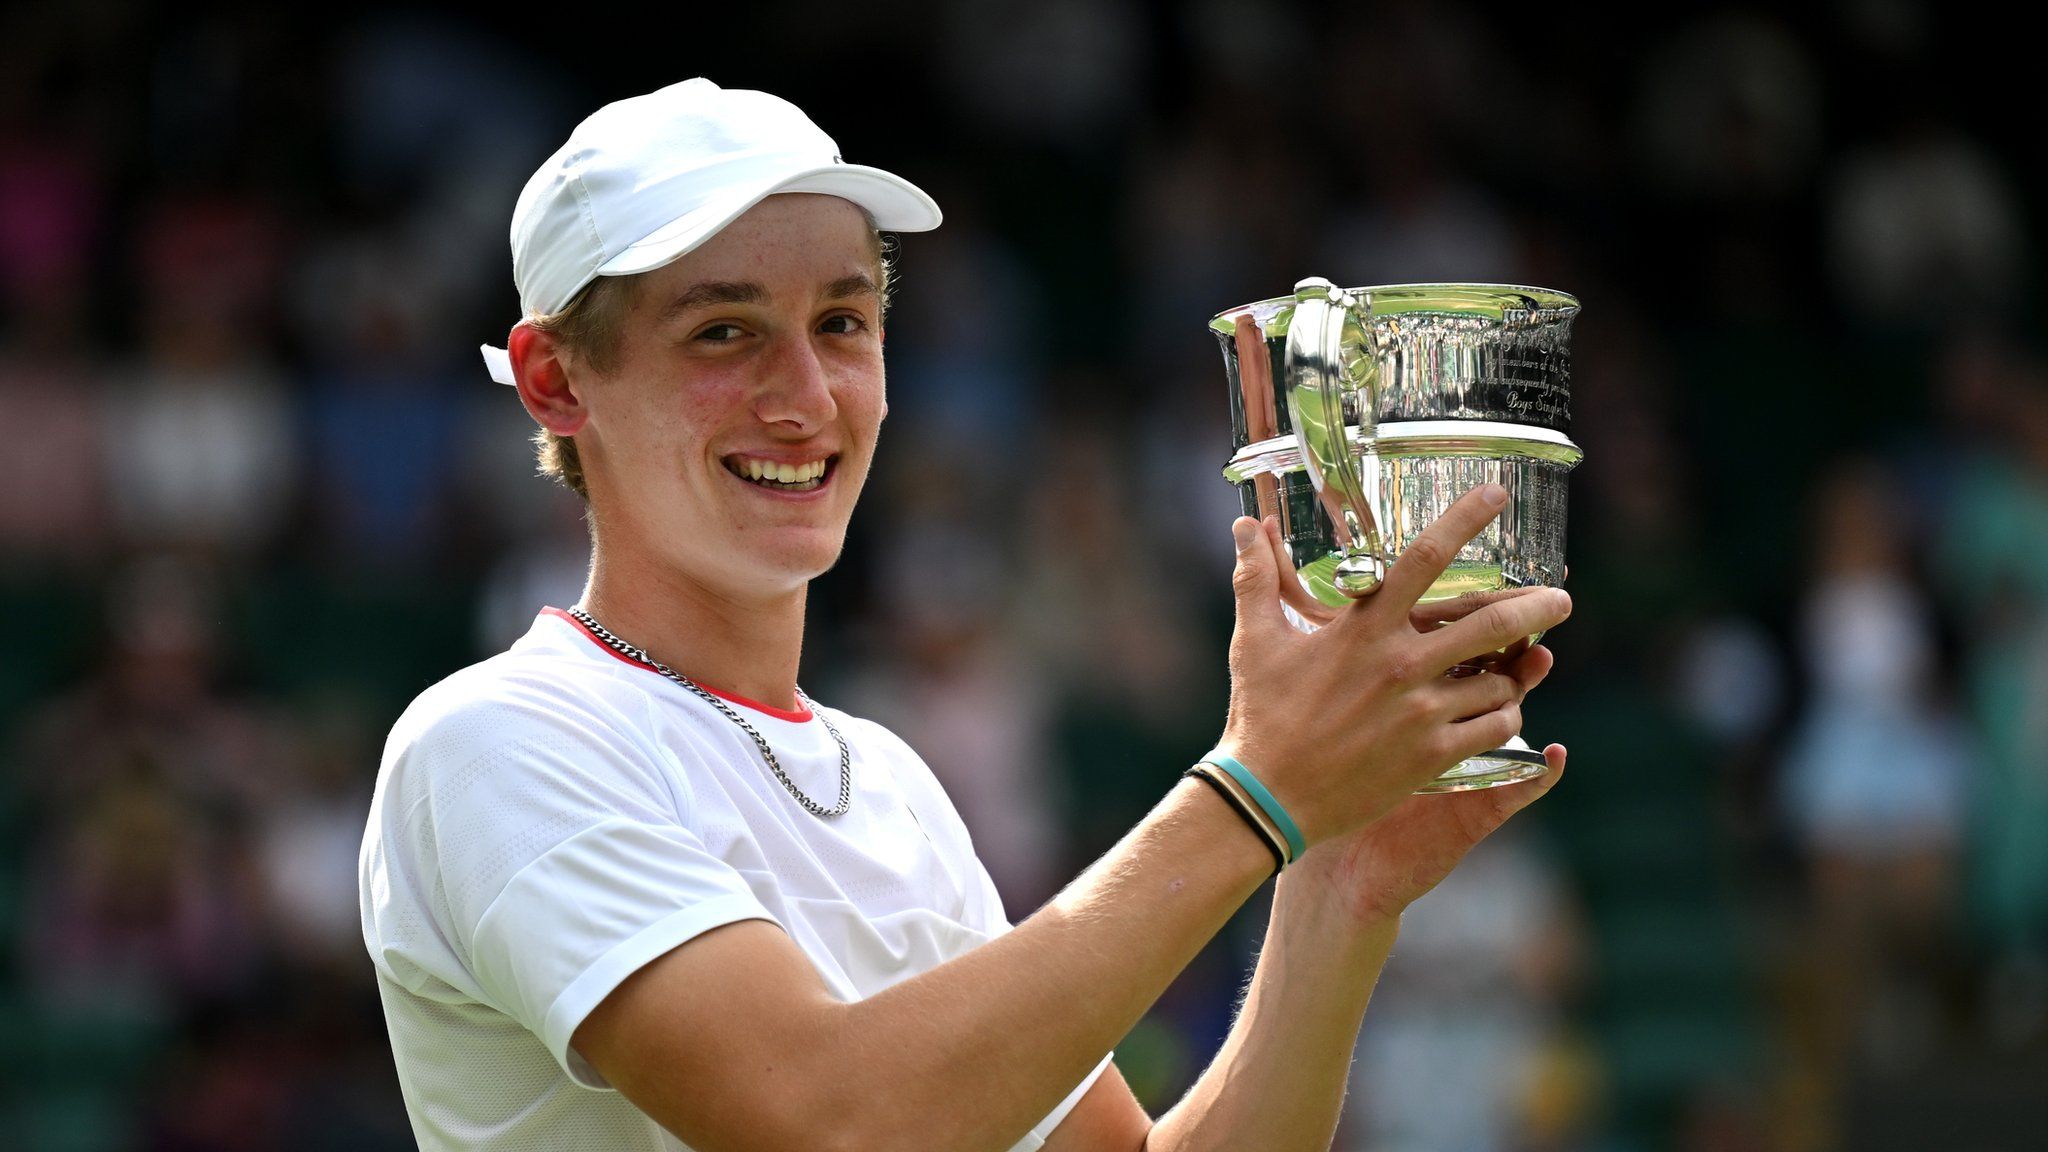 Henry Searle with Wimbledon trophy